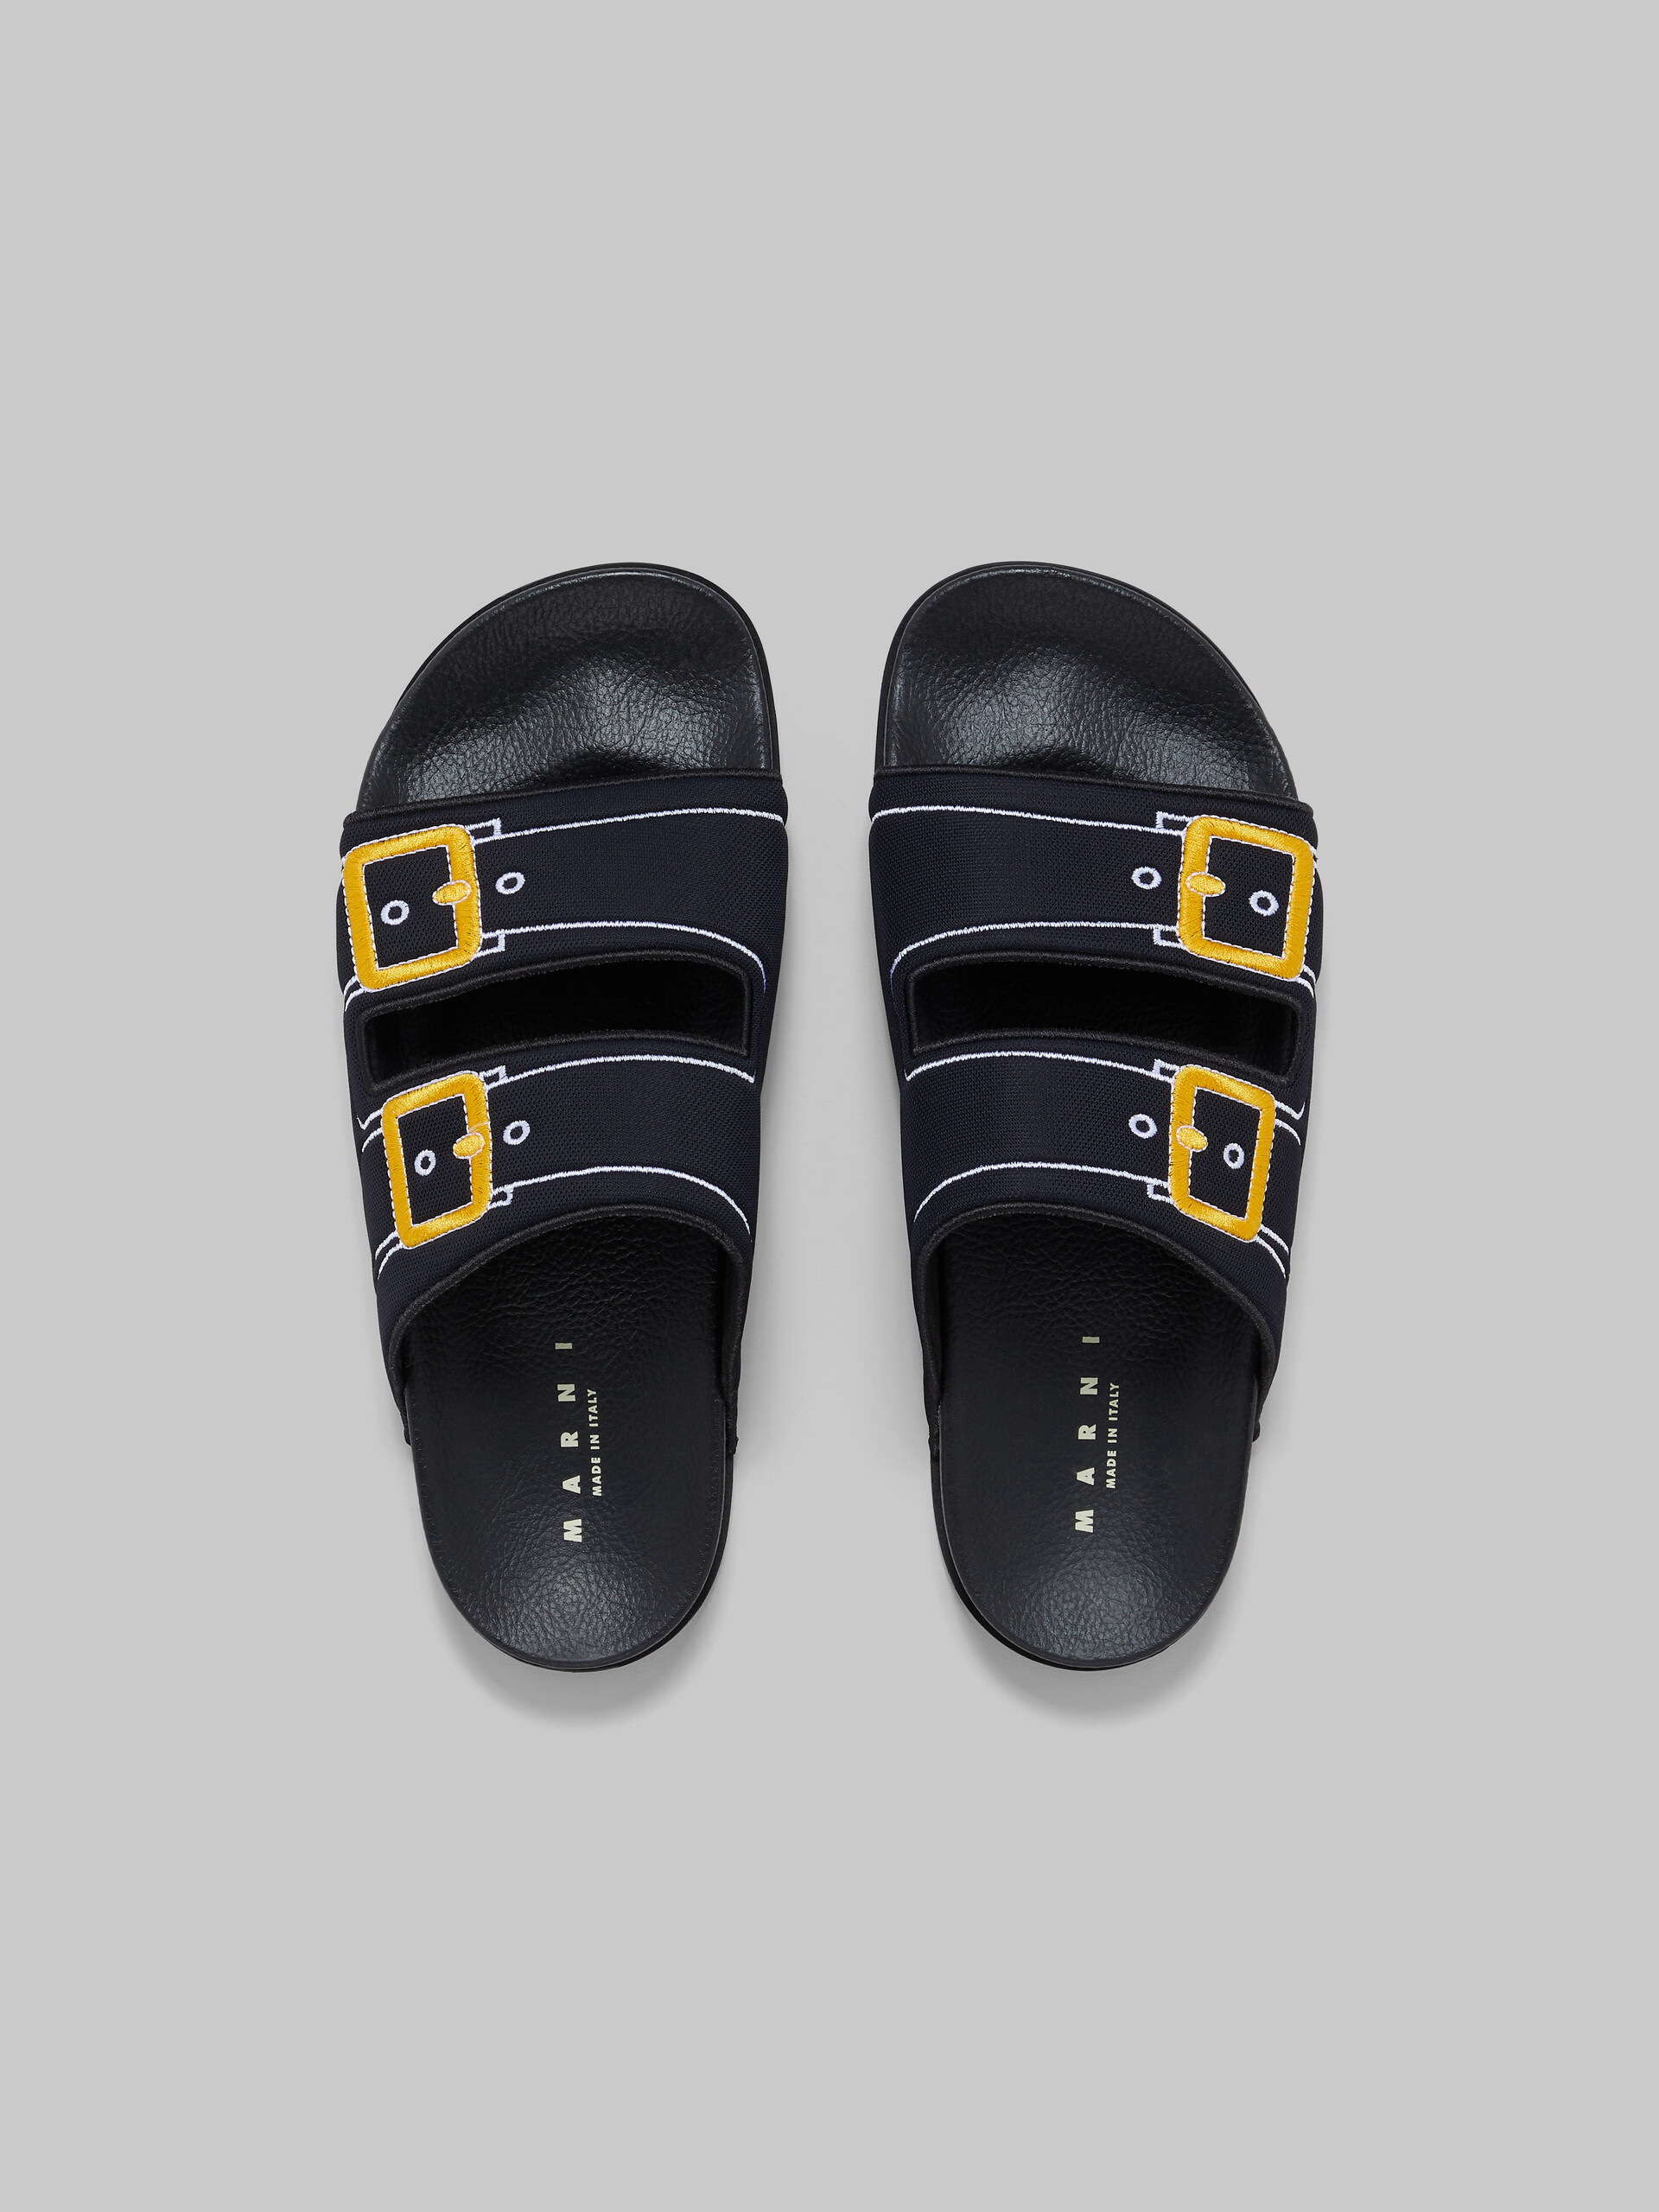 Blue trompe l'oeil slider with embroidered buckles - Sandals - Image 4